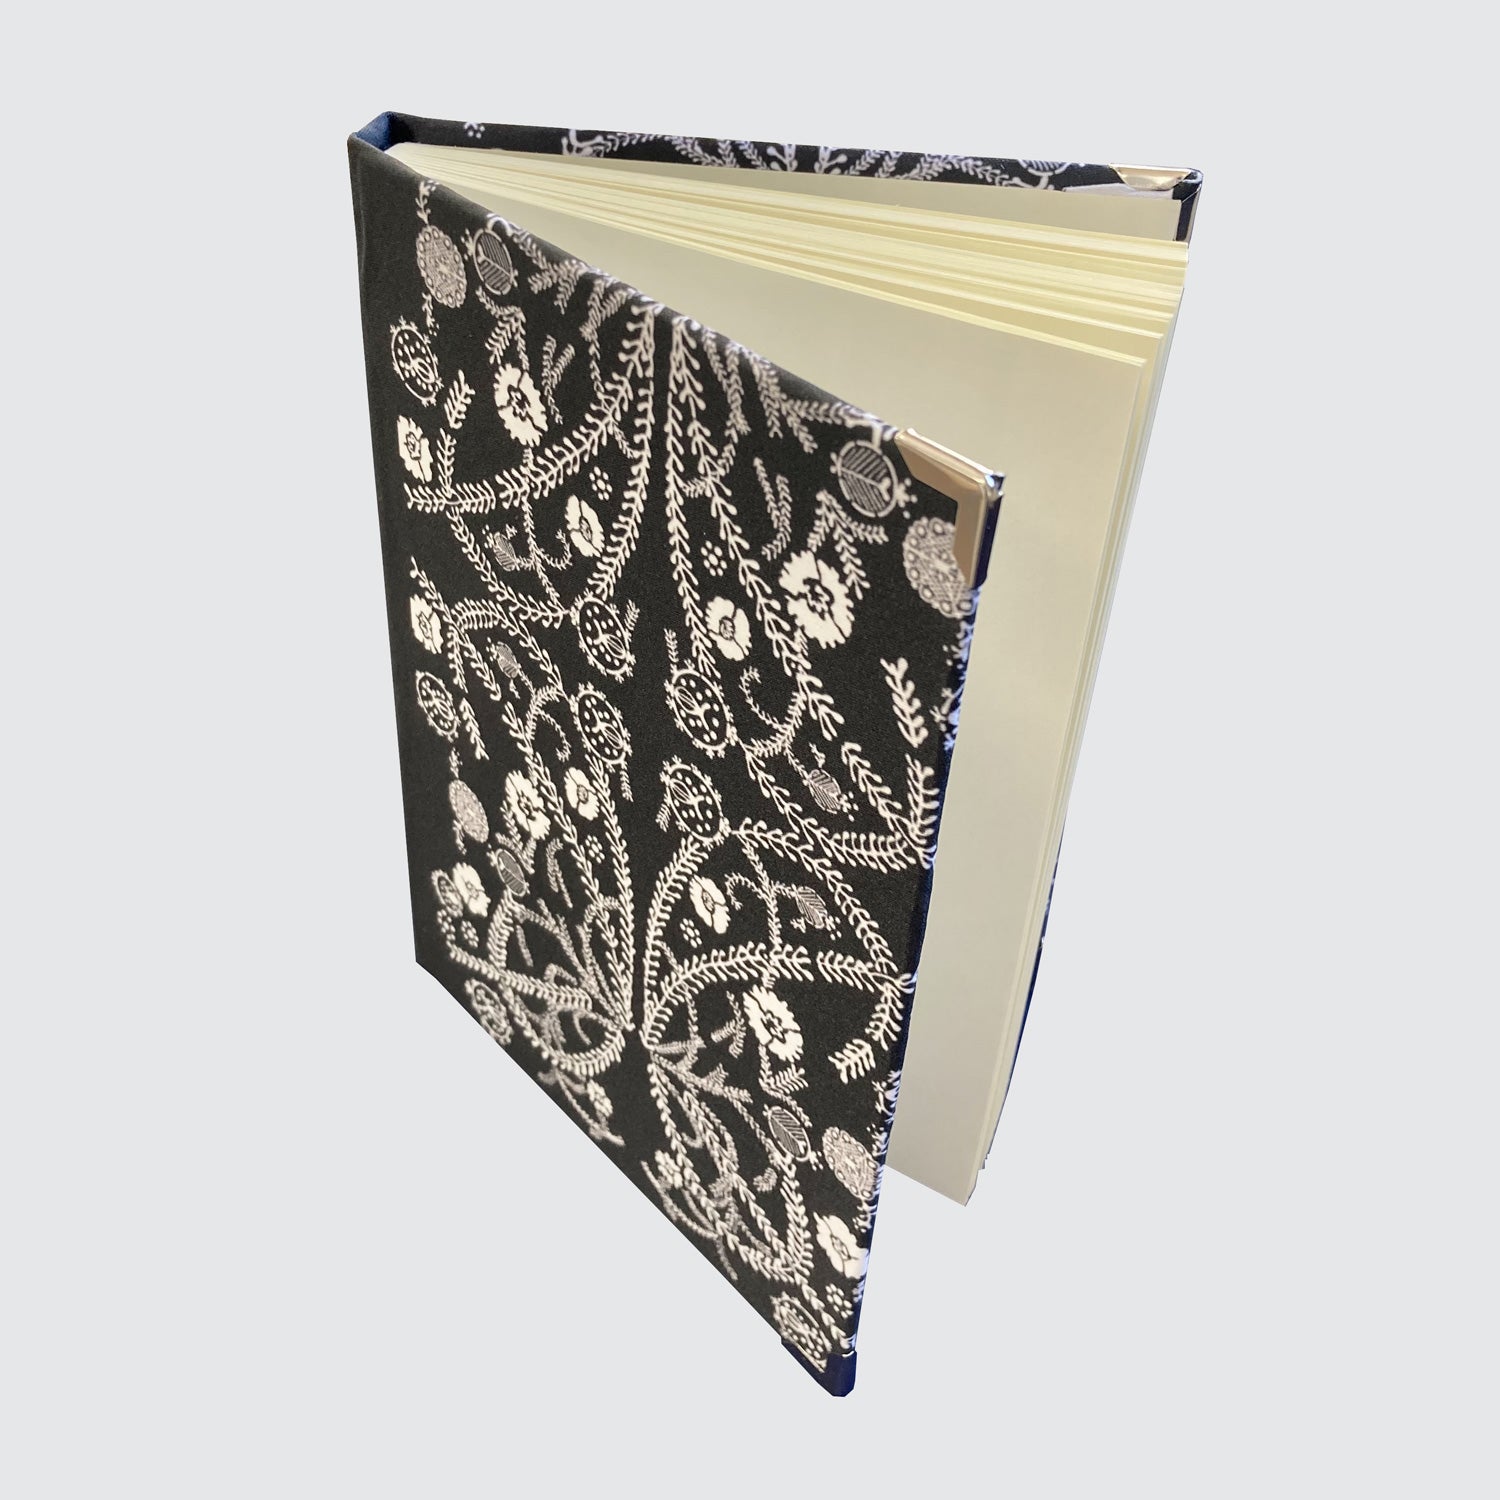 Satin hardback covered Journal with blank pages. Black with White Foliage design.